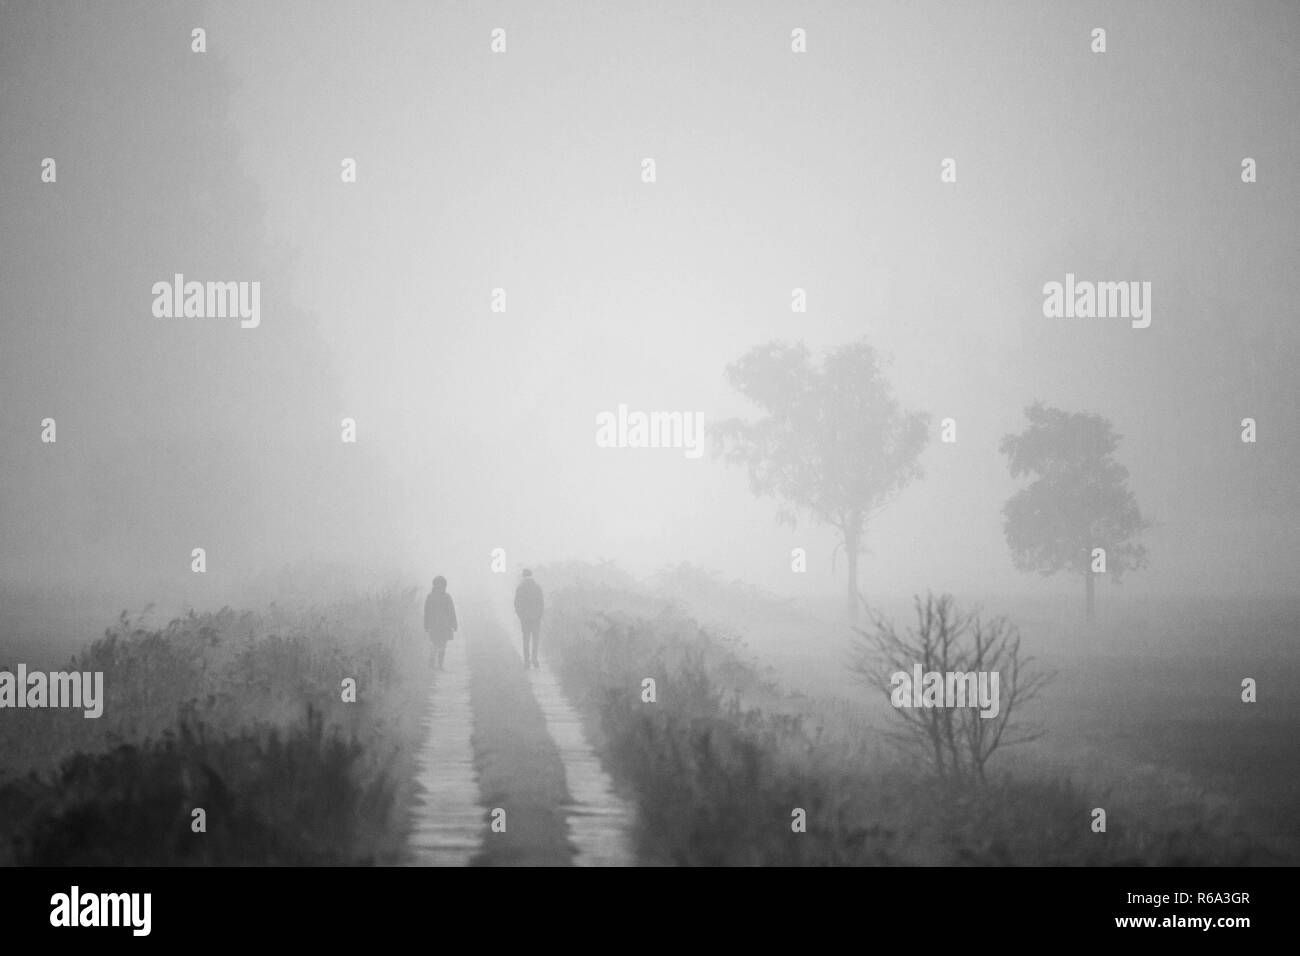 Two Strollers In Foggy Landscape Stock Photo